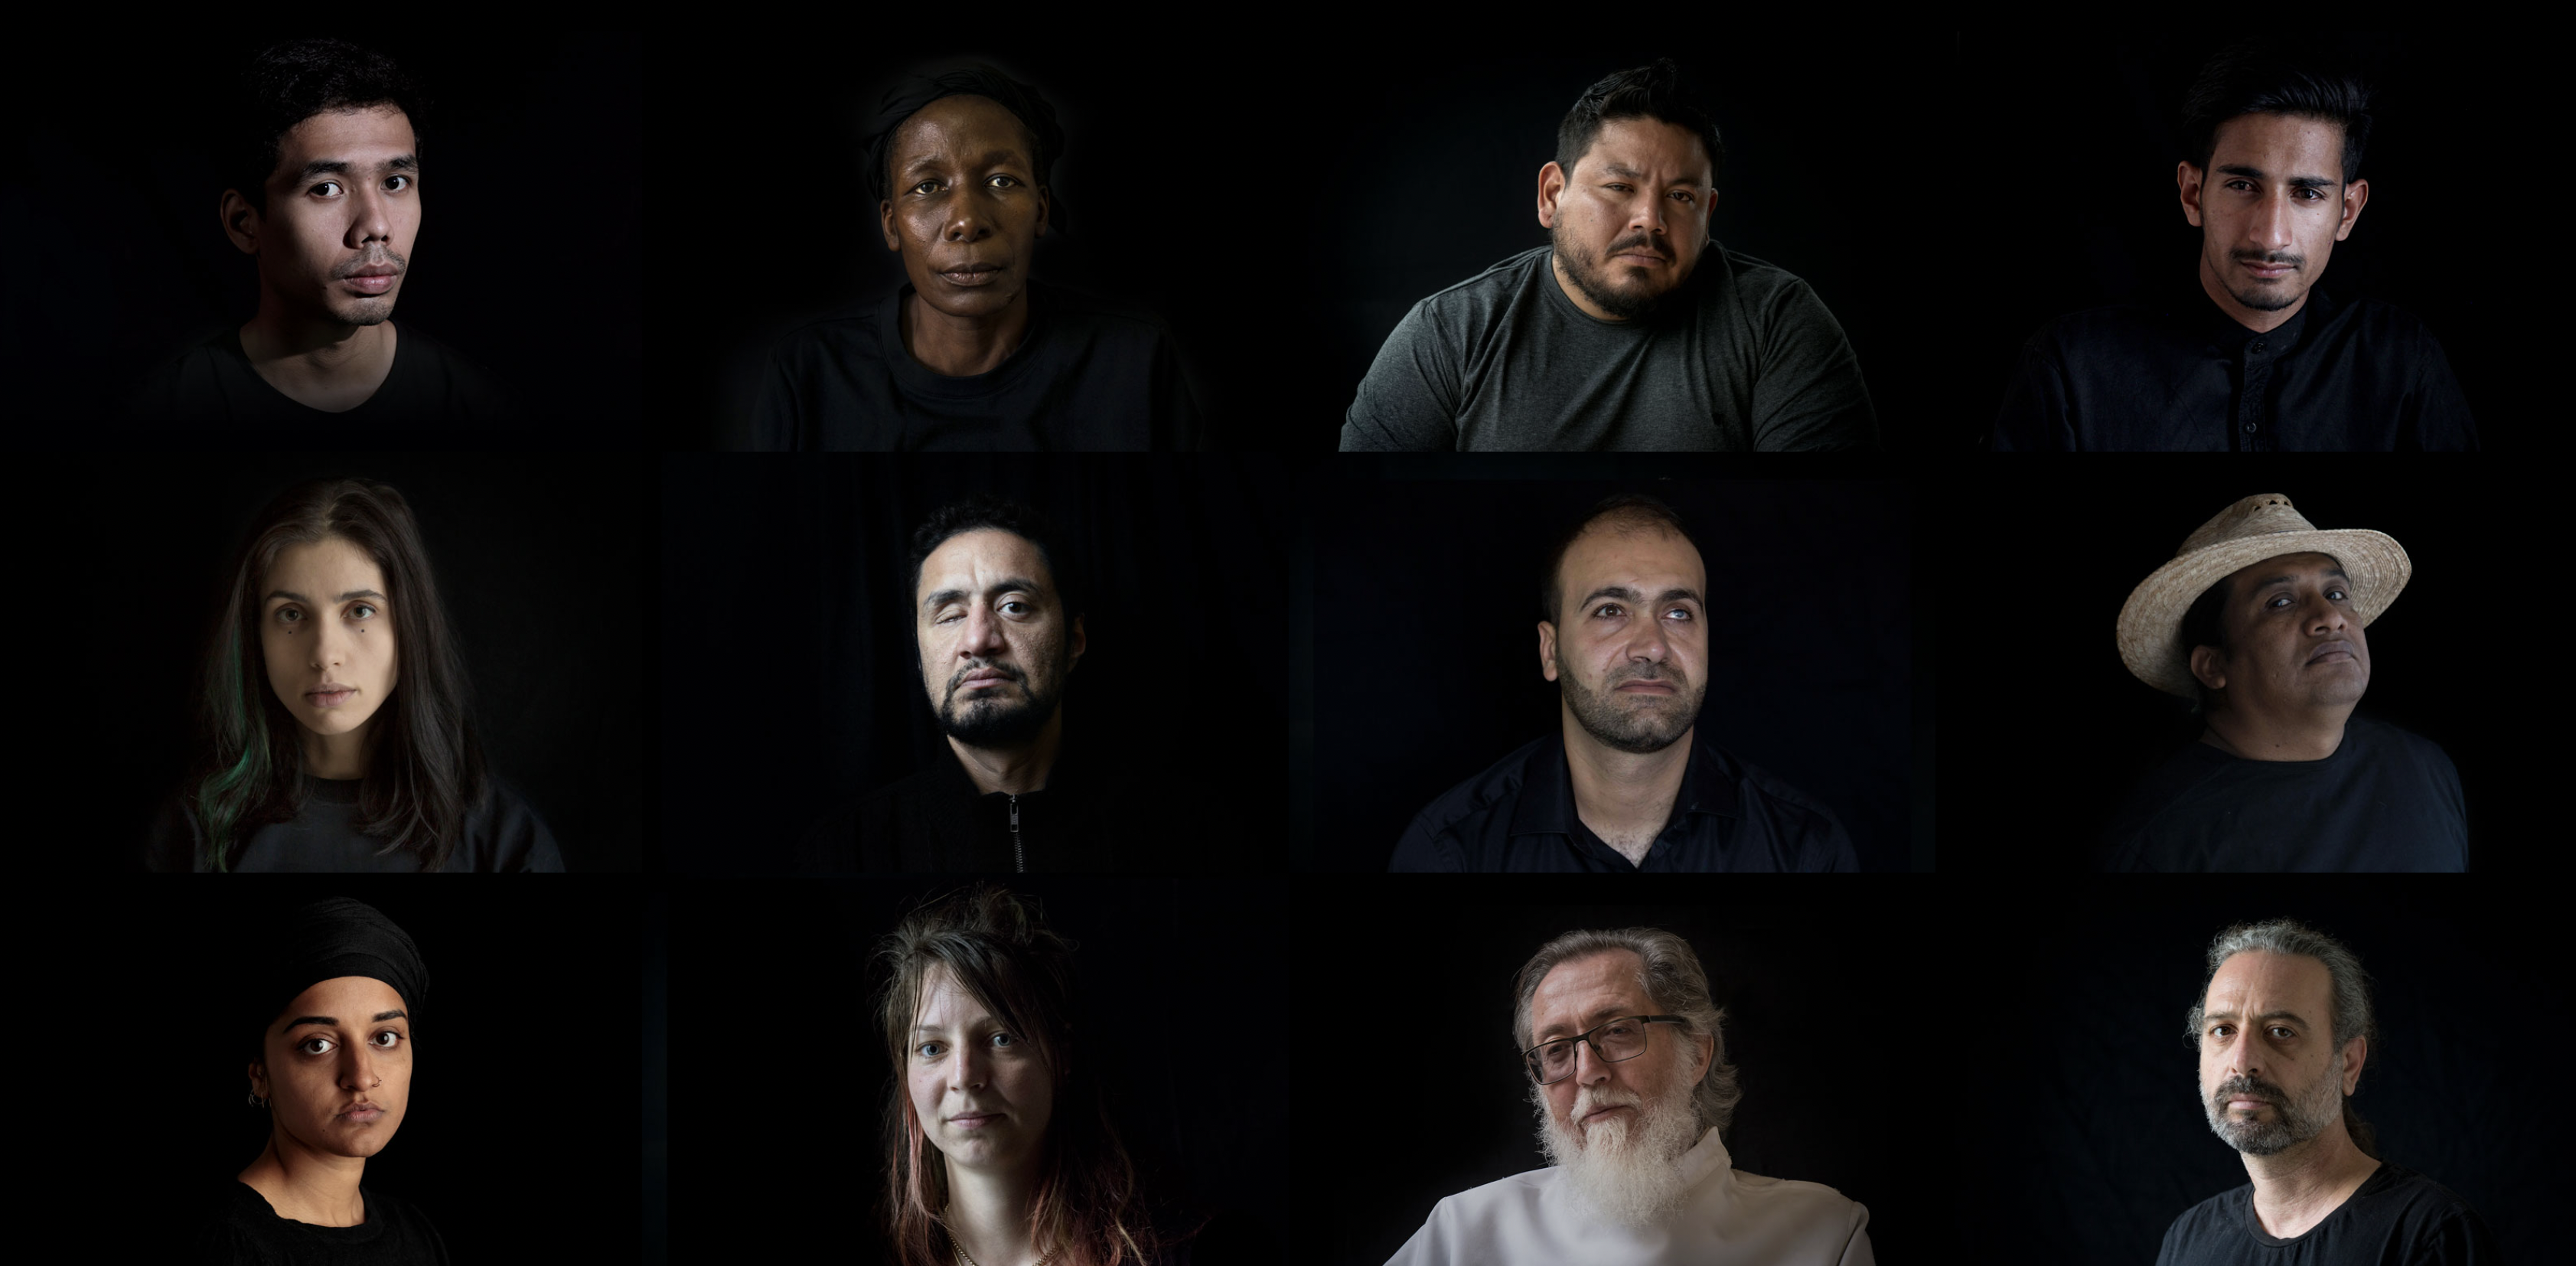 Unhealed Wounds: The Faces Behind the Injuries of Crowd-Control Weapons